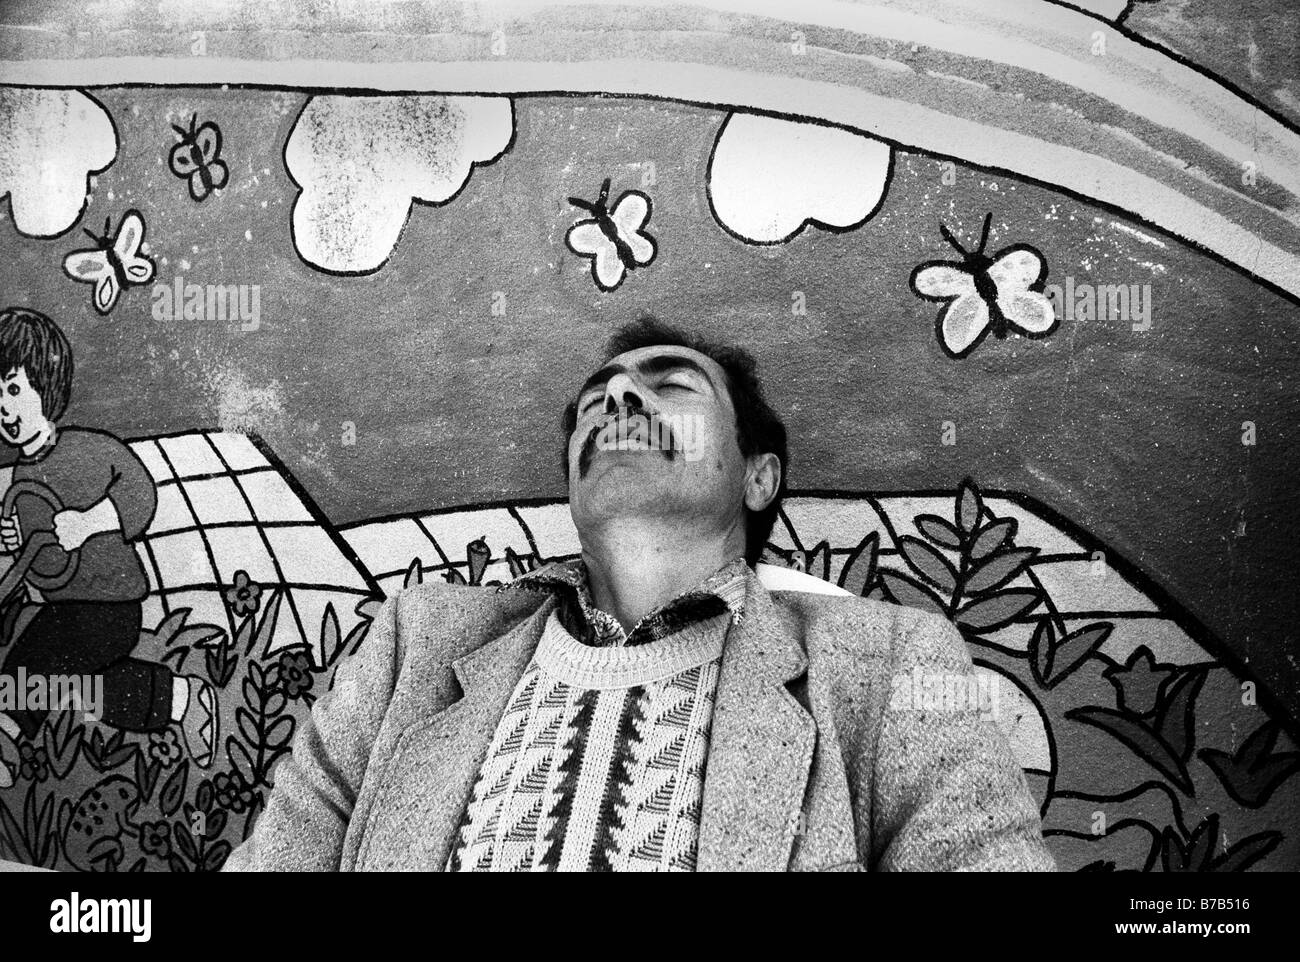 A Palestinian man sleeping in a local school playground in Samaria area West bank Israel Stock Photo